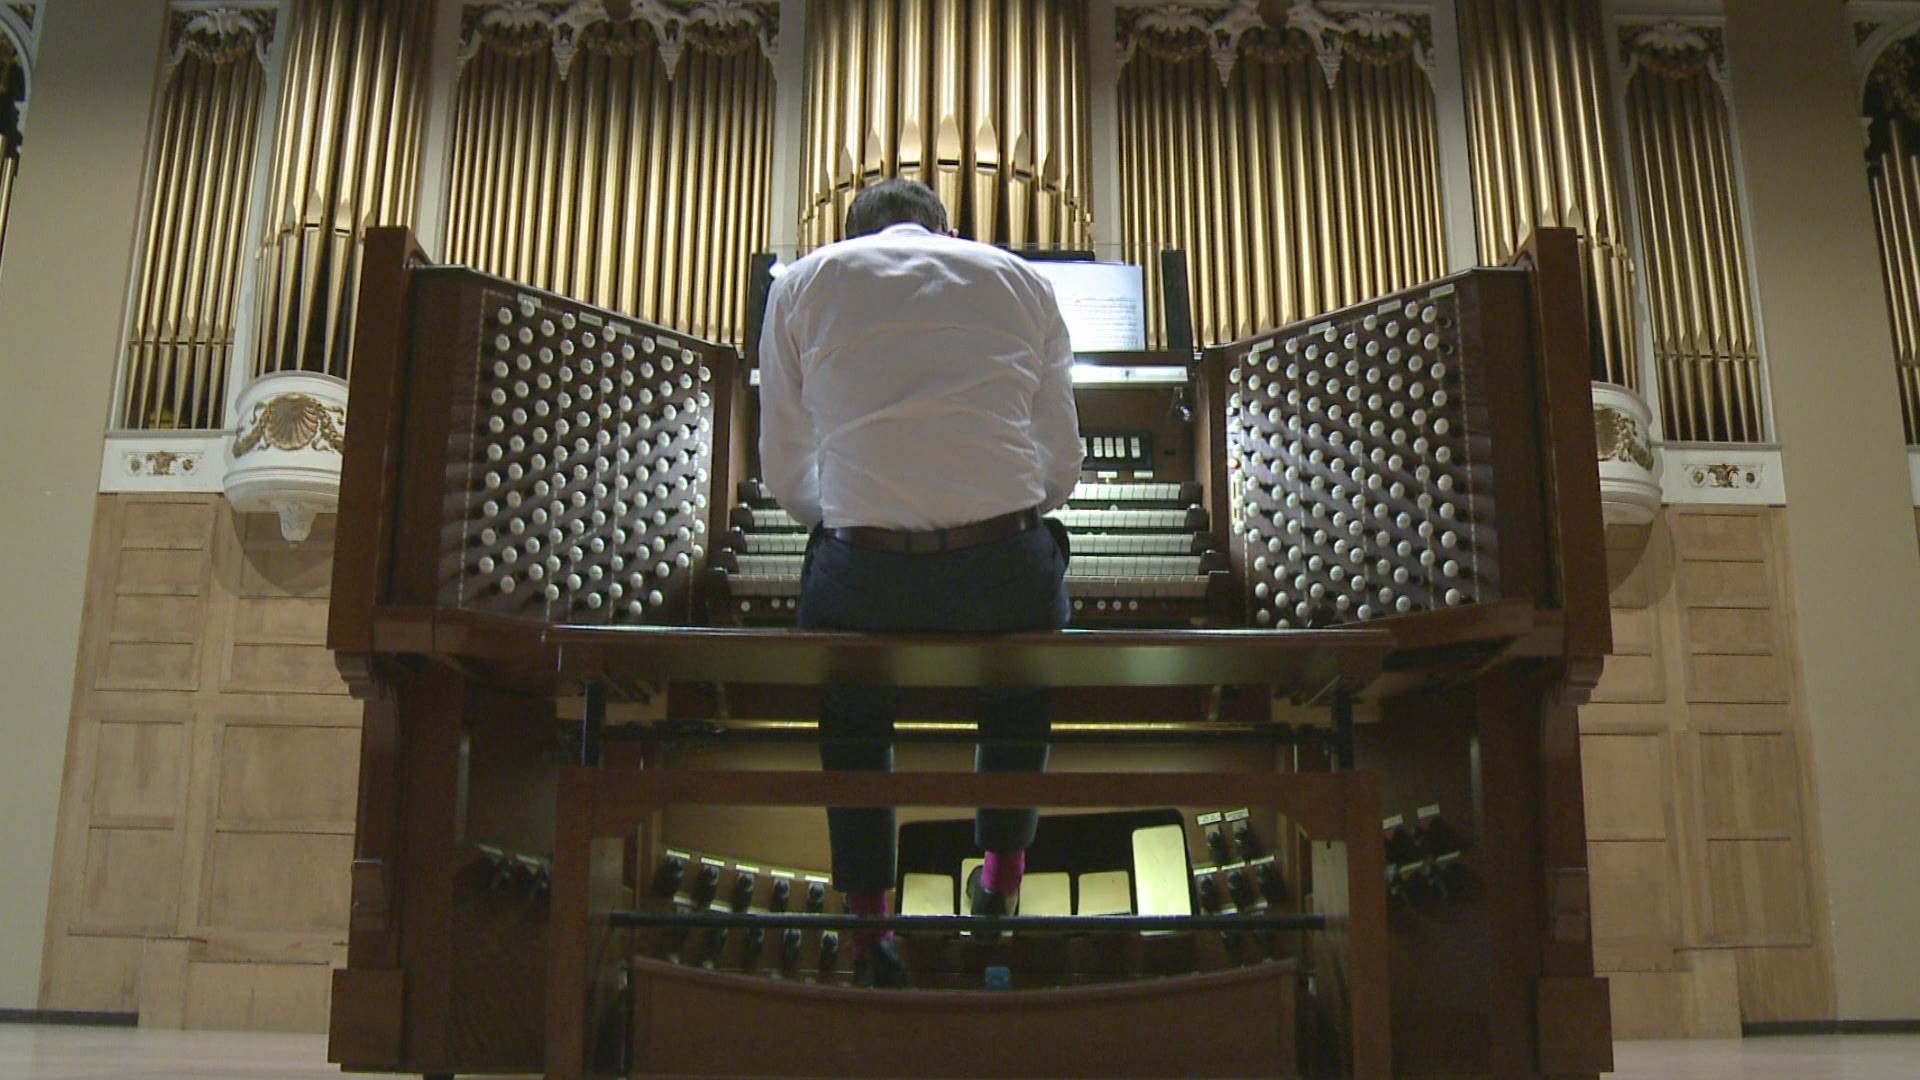 Muni He 1080 - Portland's new municipal organist comes with pink socks and a British accent ...